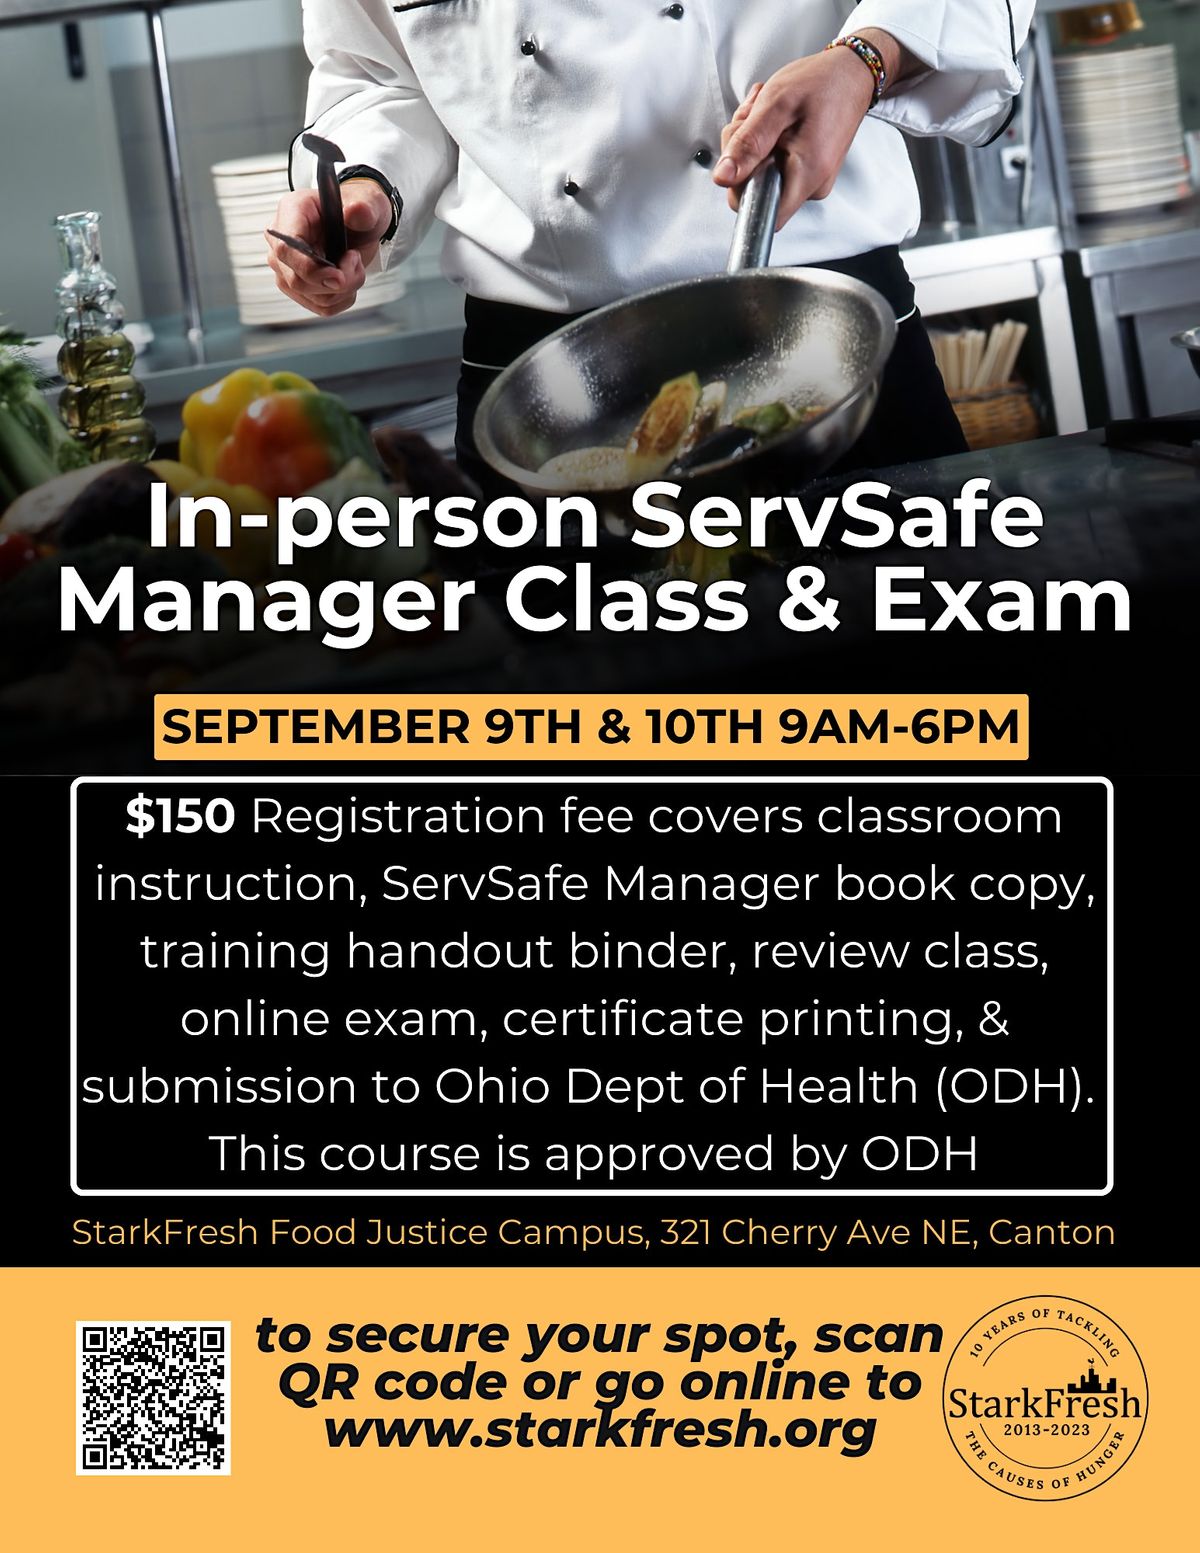 In-person ServSafe Manager-level Class & Exam